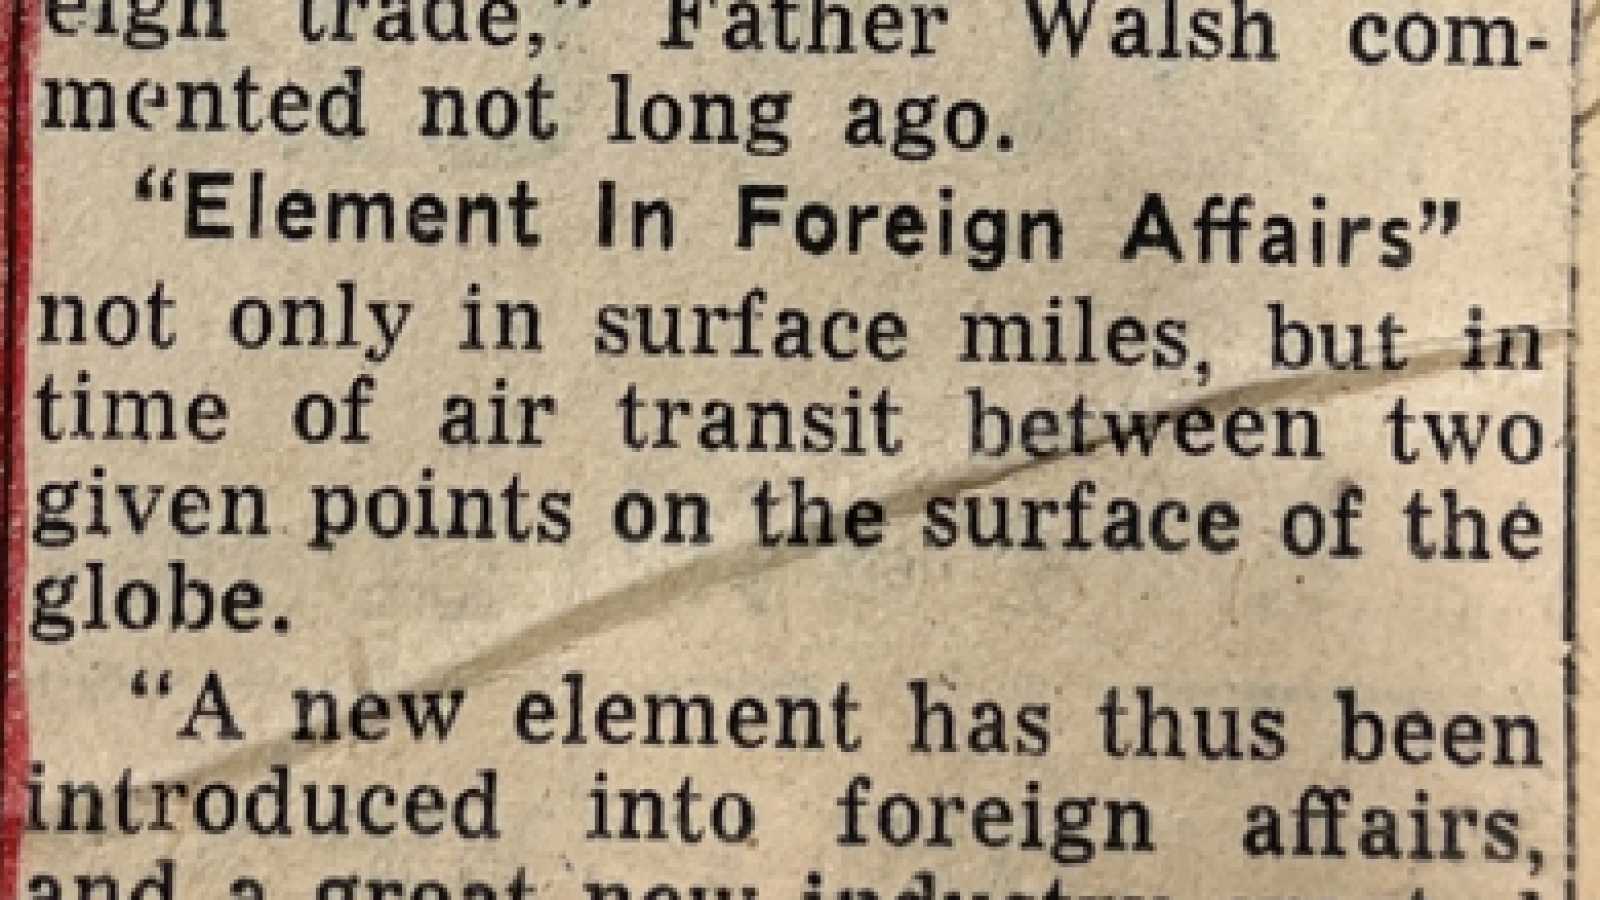 Father Walsh quote in the 1954 Hoya article about the addition of Air Transportation courses to the curriculum.